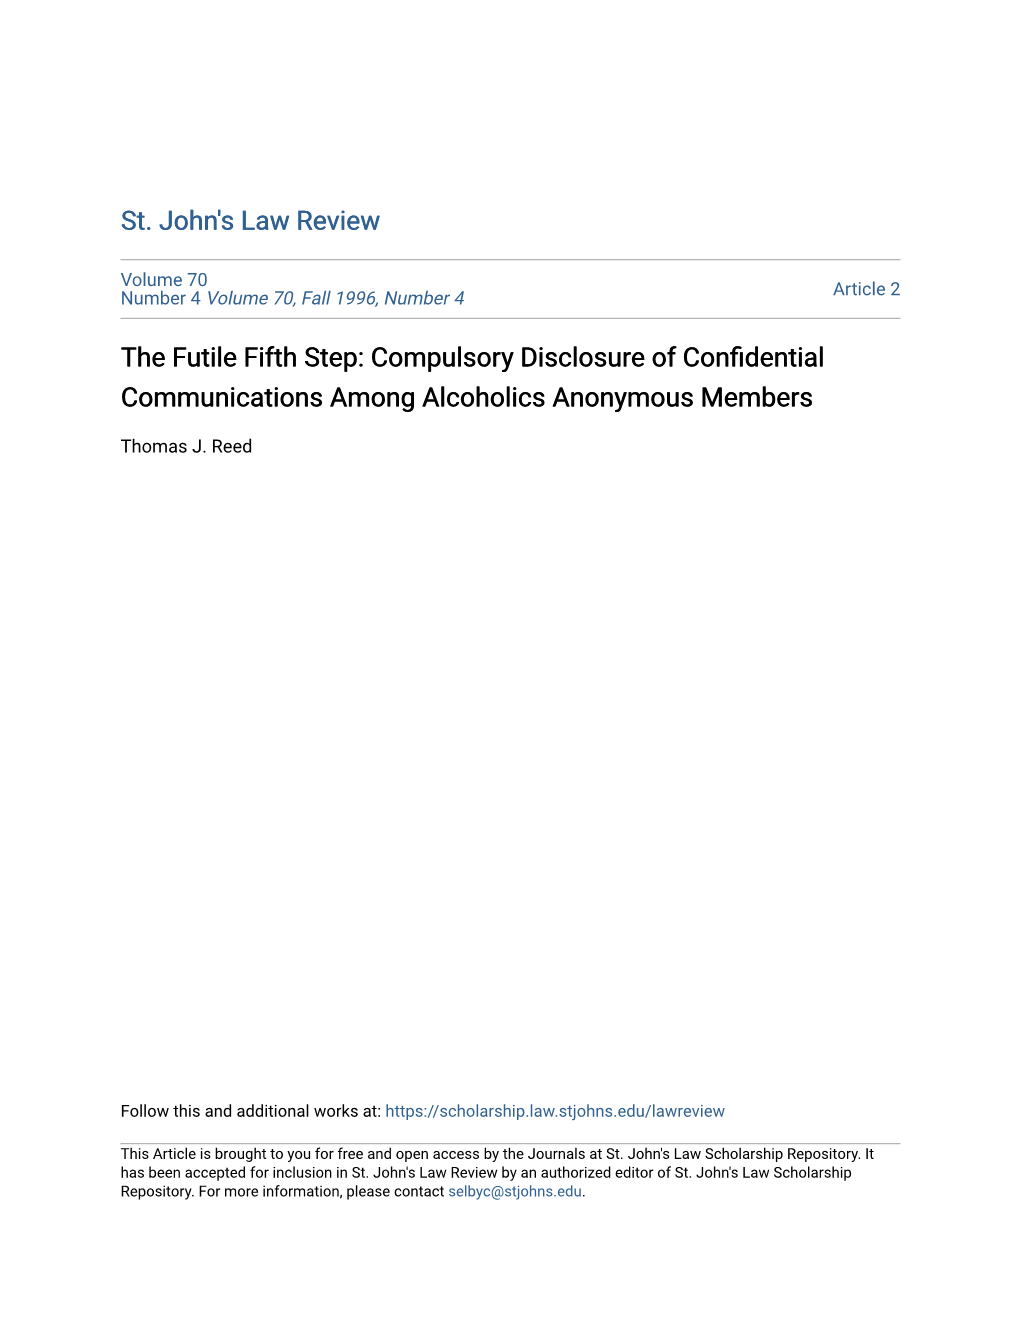 The Futile Fifth Step: Compulsory Disclosure of Confidential Communications Among Alcoholics Anonymous Members